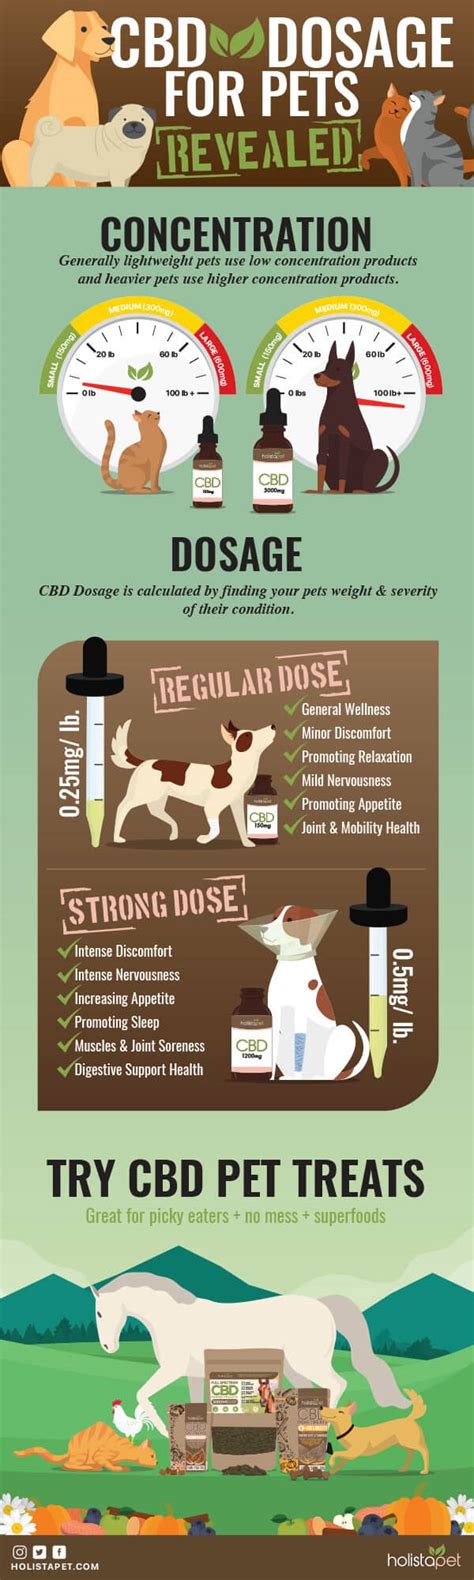  When it comes to determining the appropriate dosage of CBD for your pet, there are several factors to consider